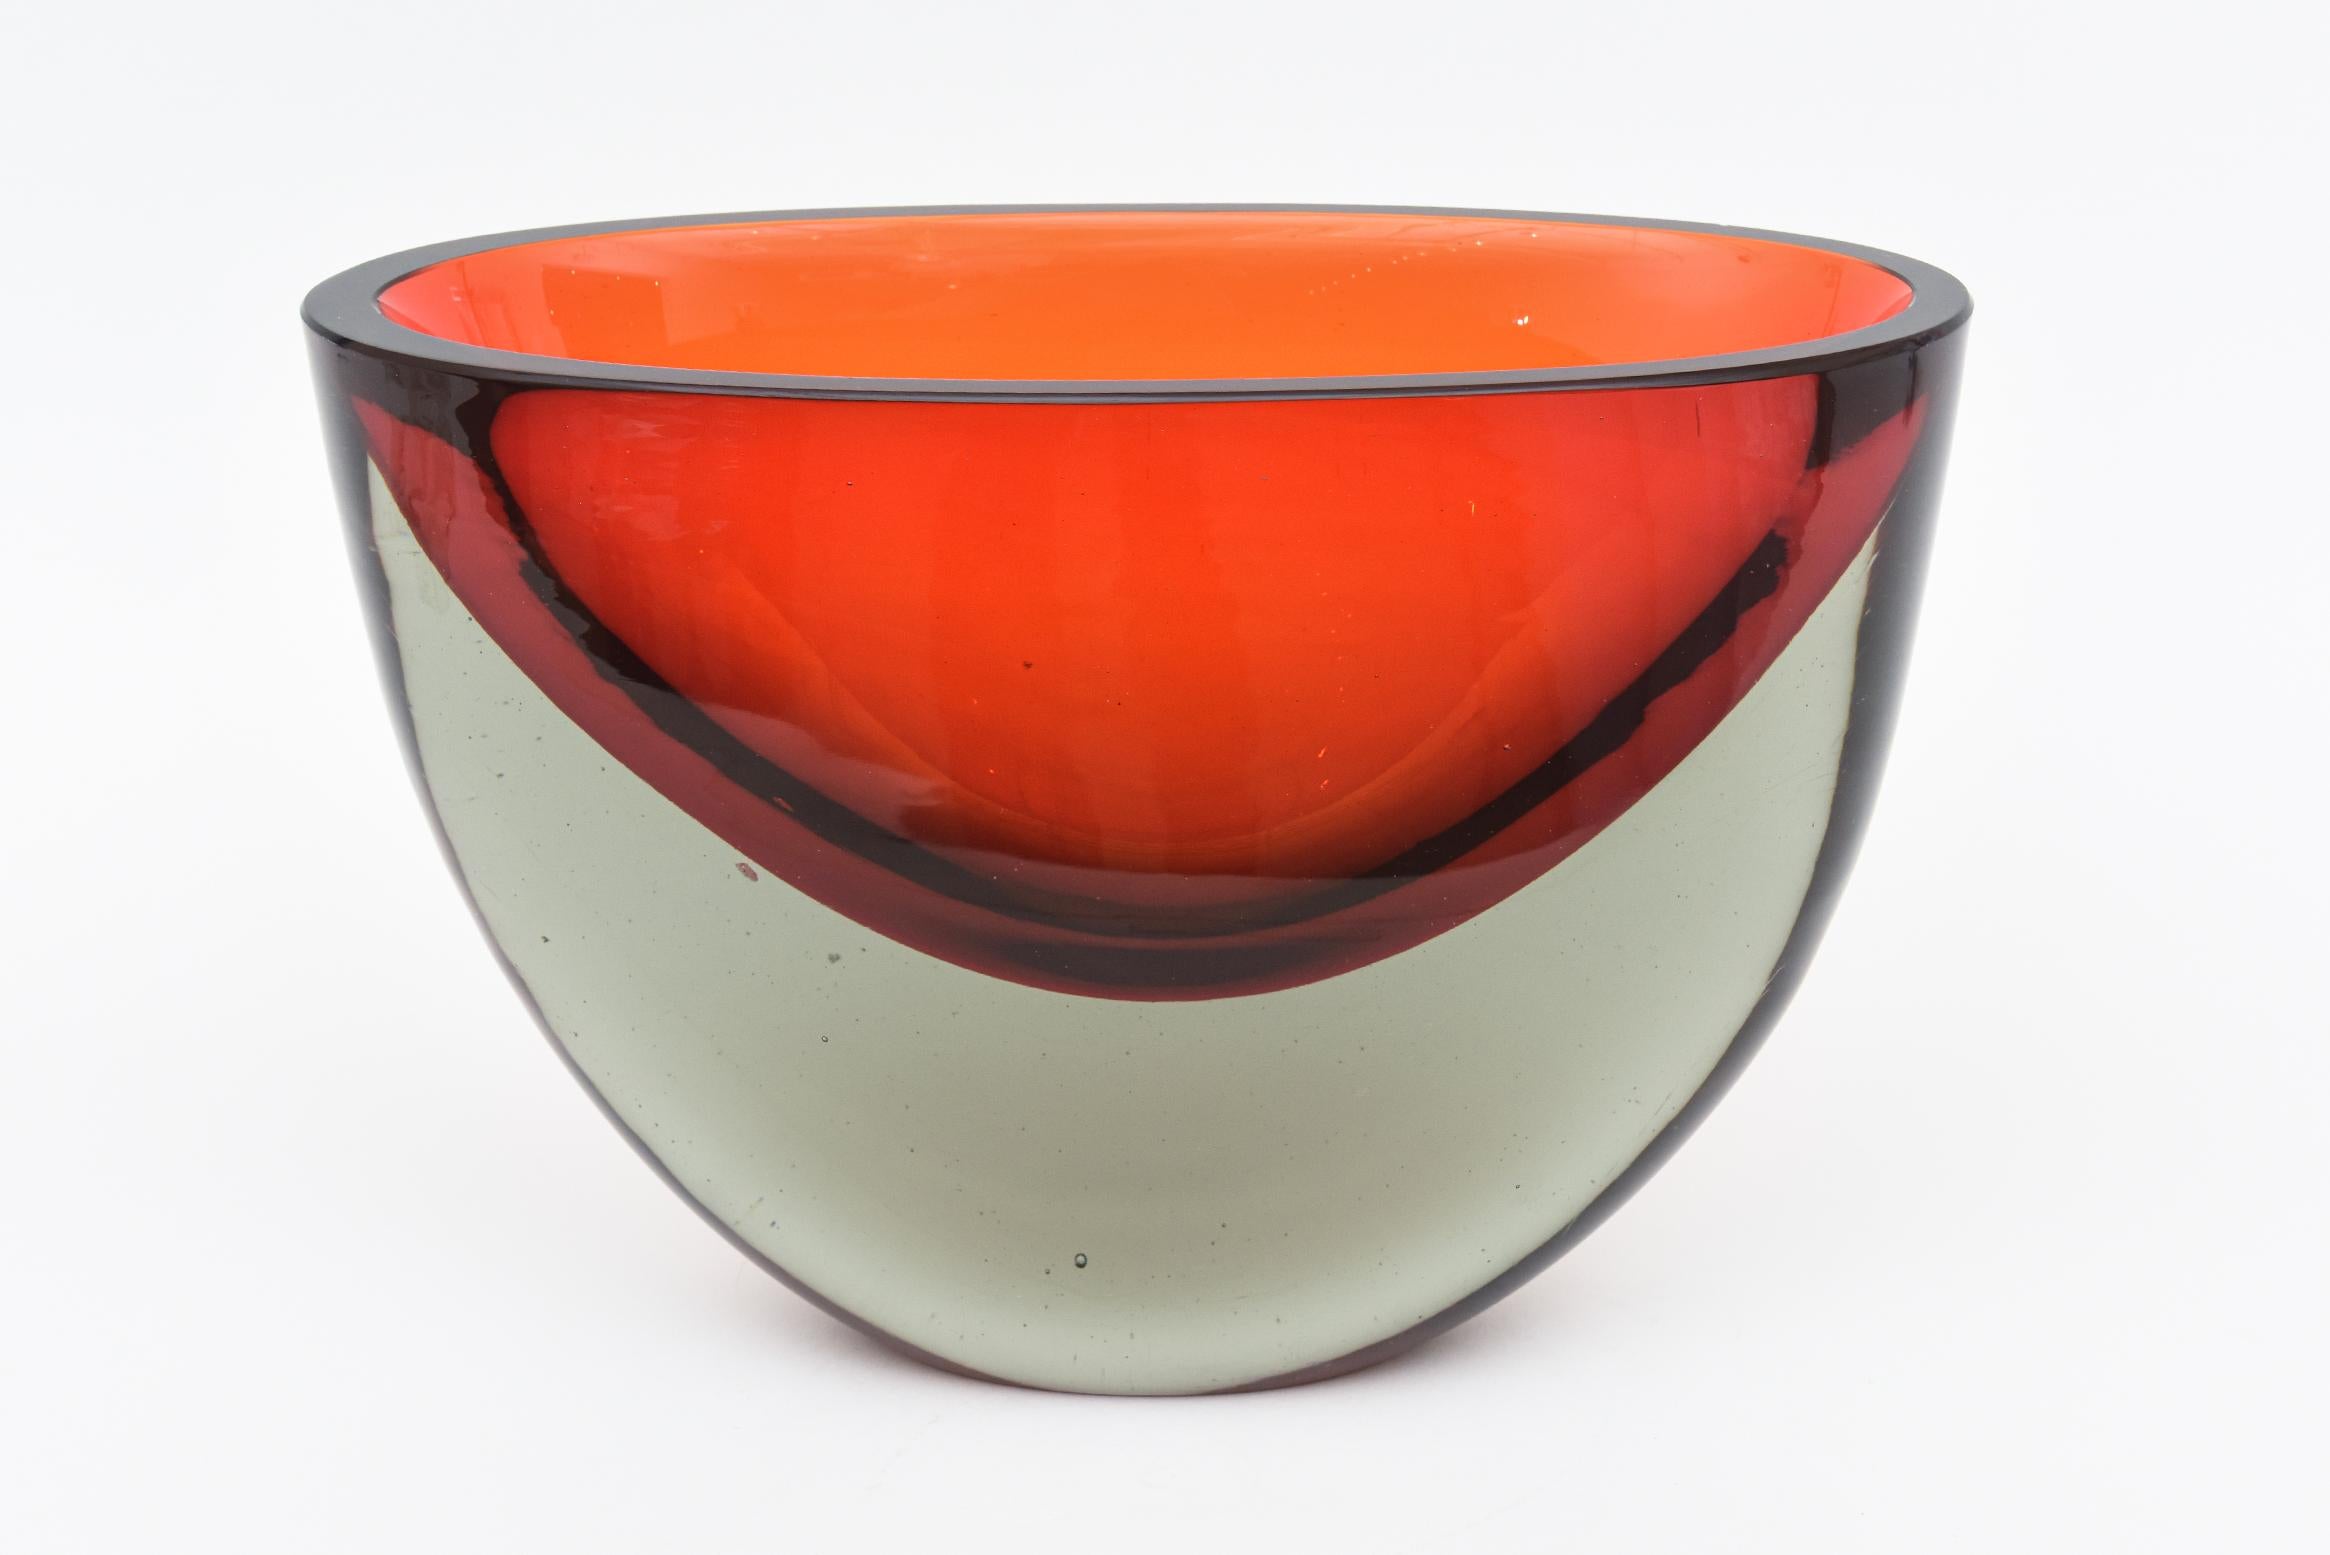 Vintage Murano Antonio da Ros for Cenedese Red, Charcoal, Orange Sommerso Vase  For Sale 5